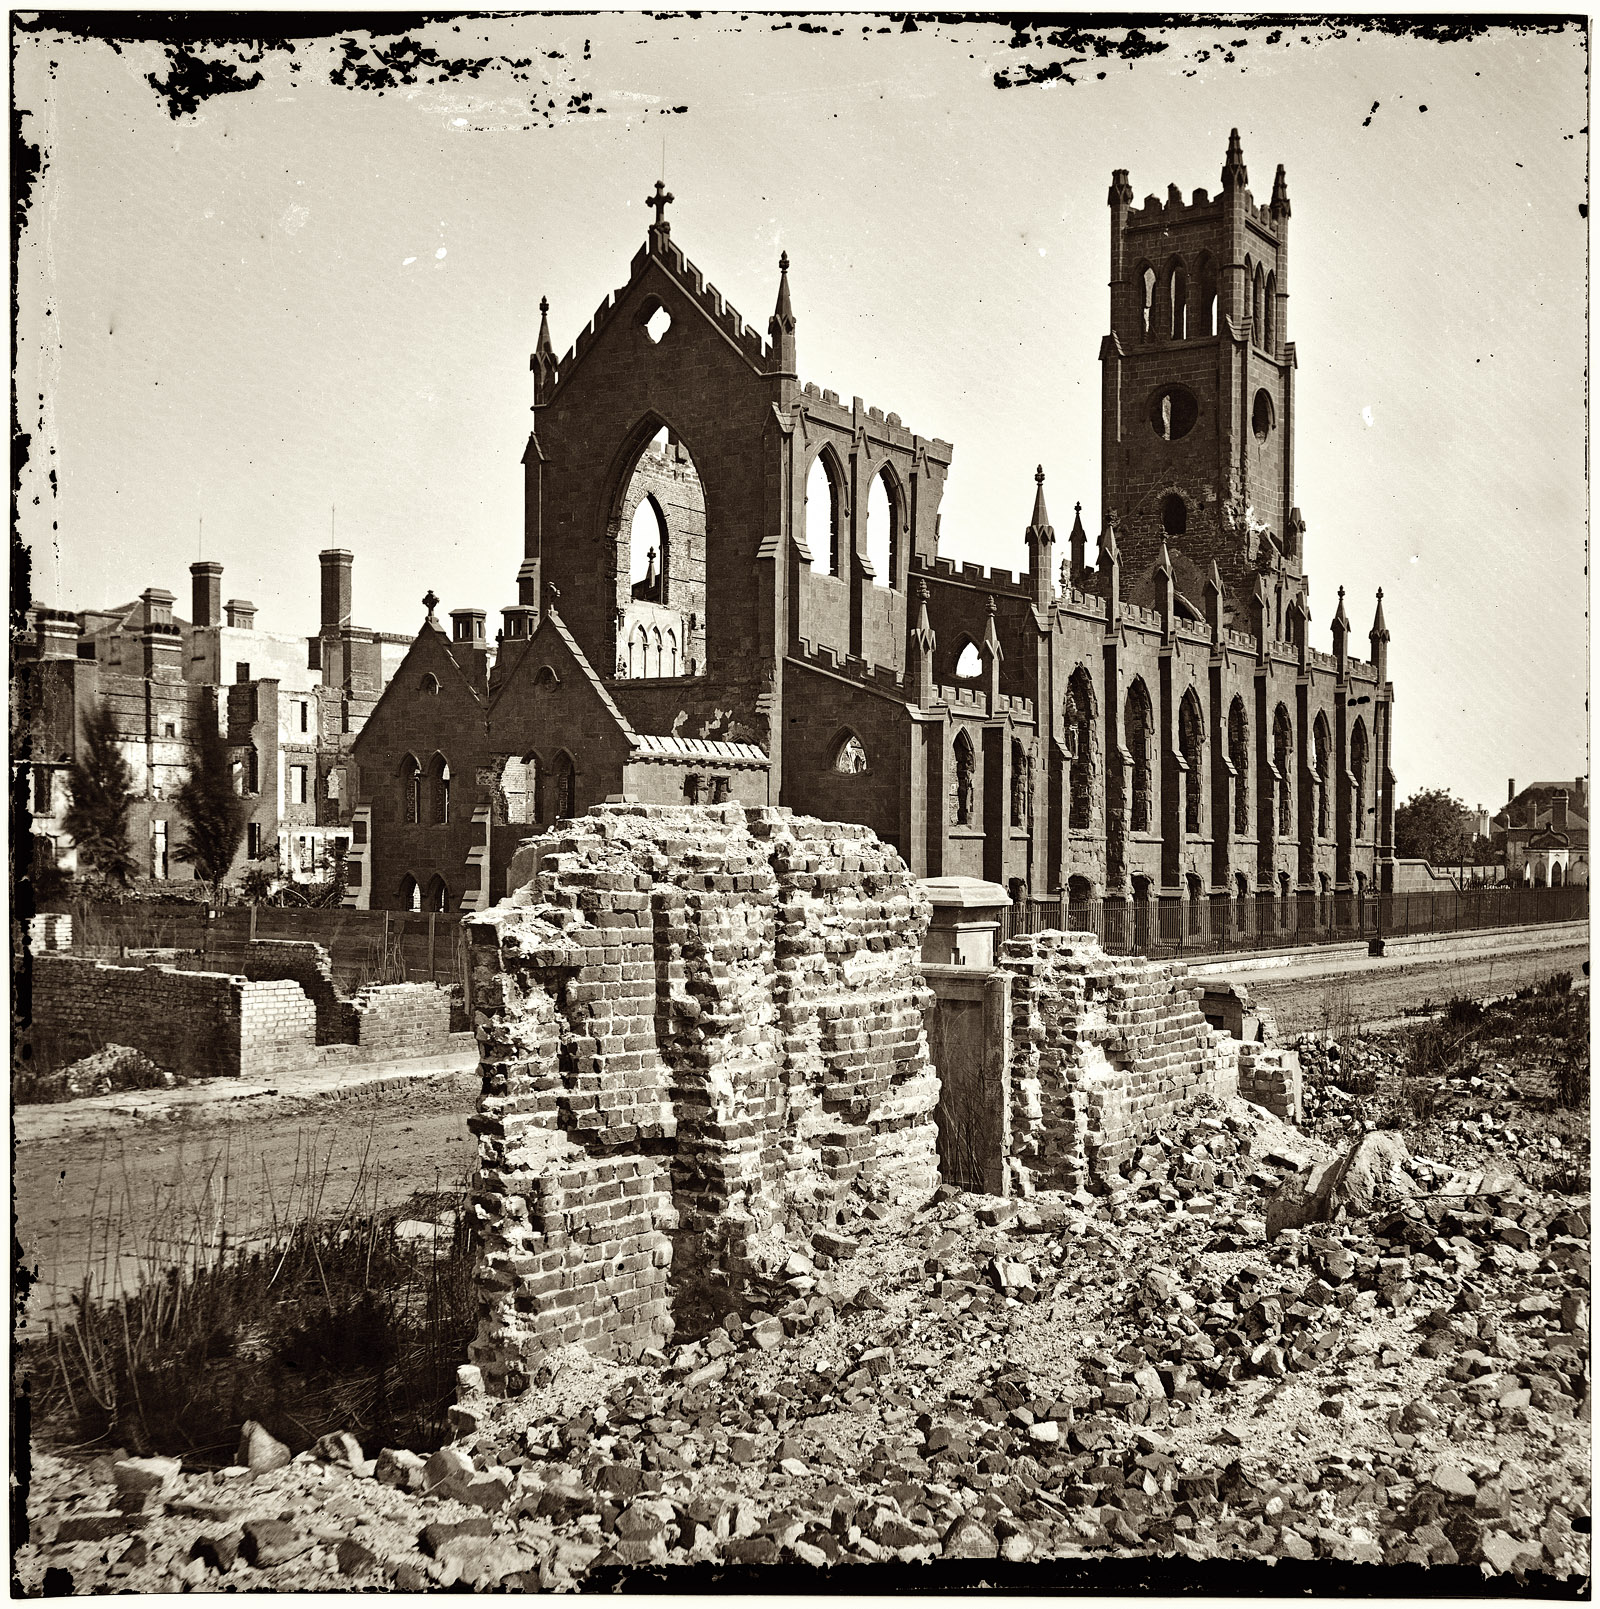 1865. "Charleston, South Carolina. Ruins of the Cathedral of St. John and St. Finbar (Broad and Legare Streets) destroyed in the fire of December 1861." From photographs of the Federal Navy and seaborne expeditions against the Atlantic Coast of the Confederacy, 1863-1865. Glass plate negative, left half of stereograph pair, from Civil War photos compiled by Milhollen and Mugridge. View full size.